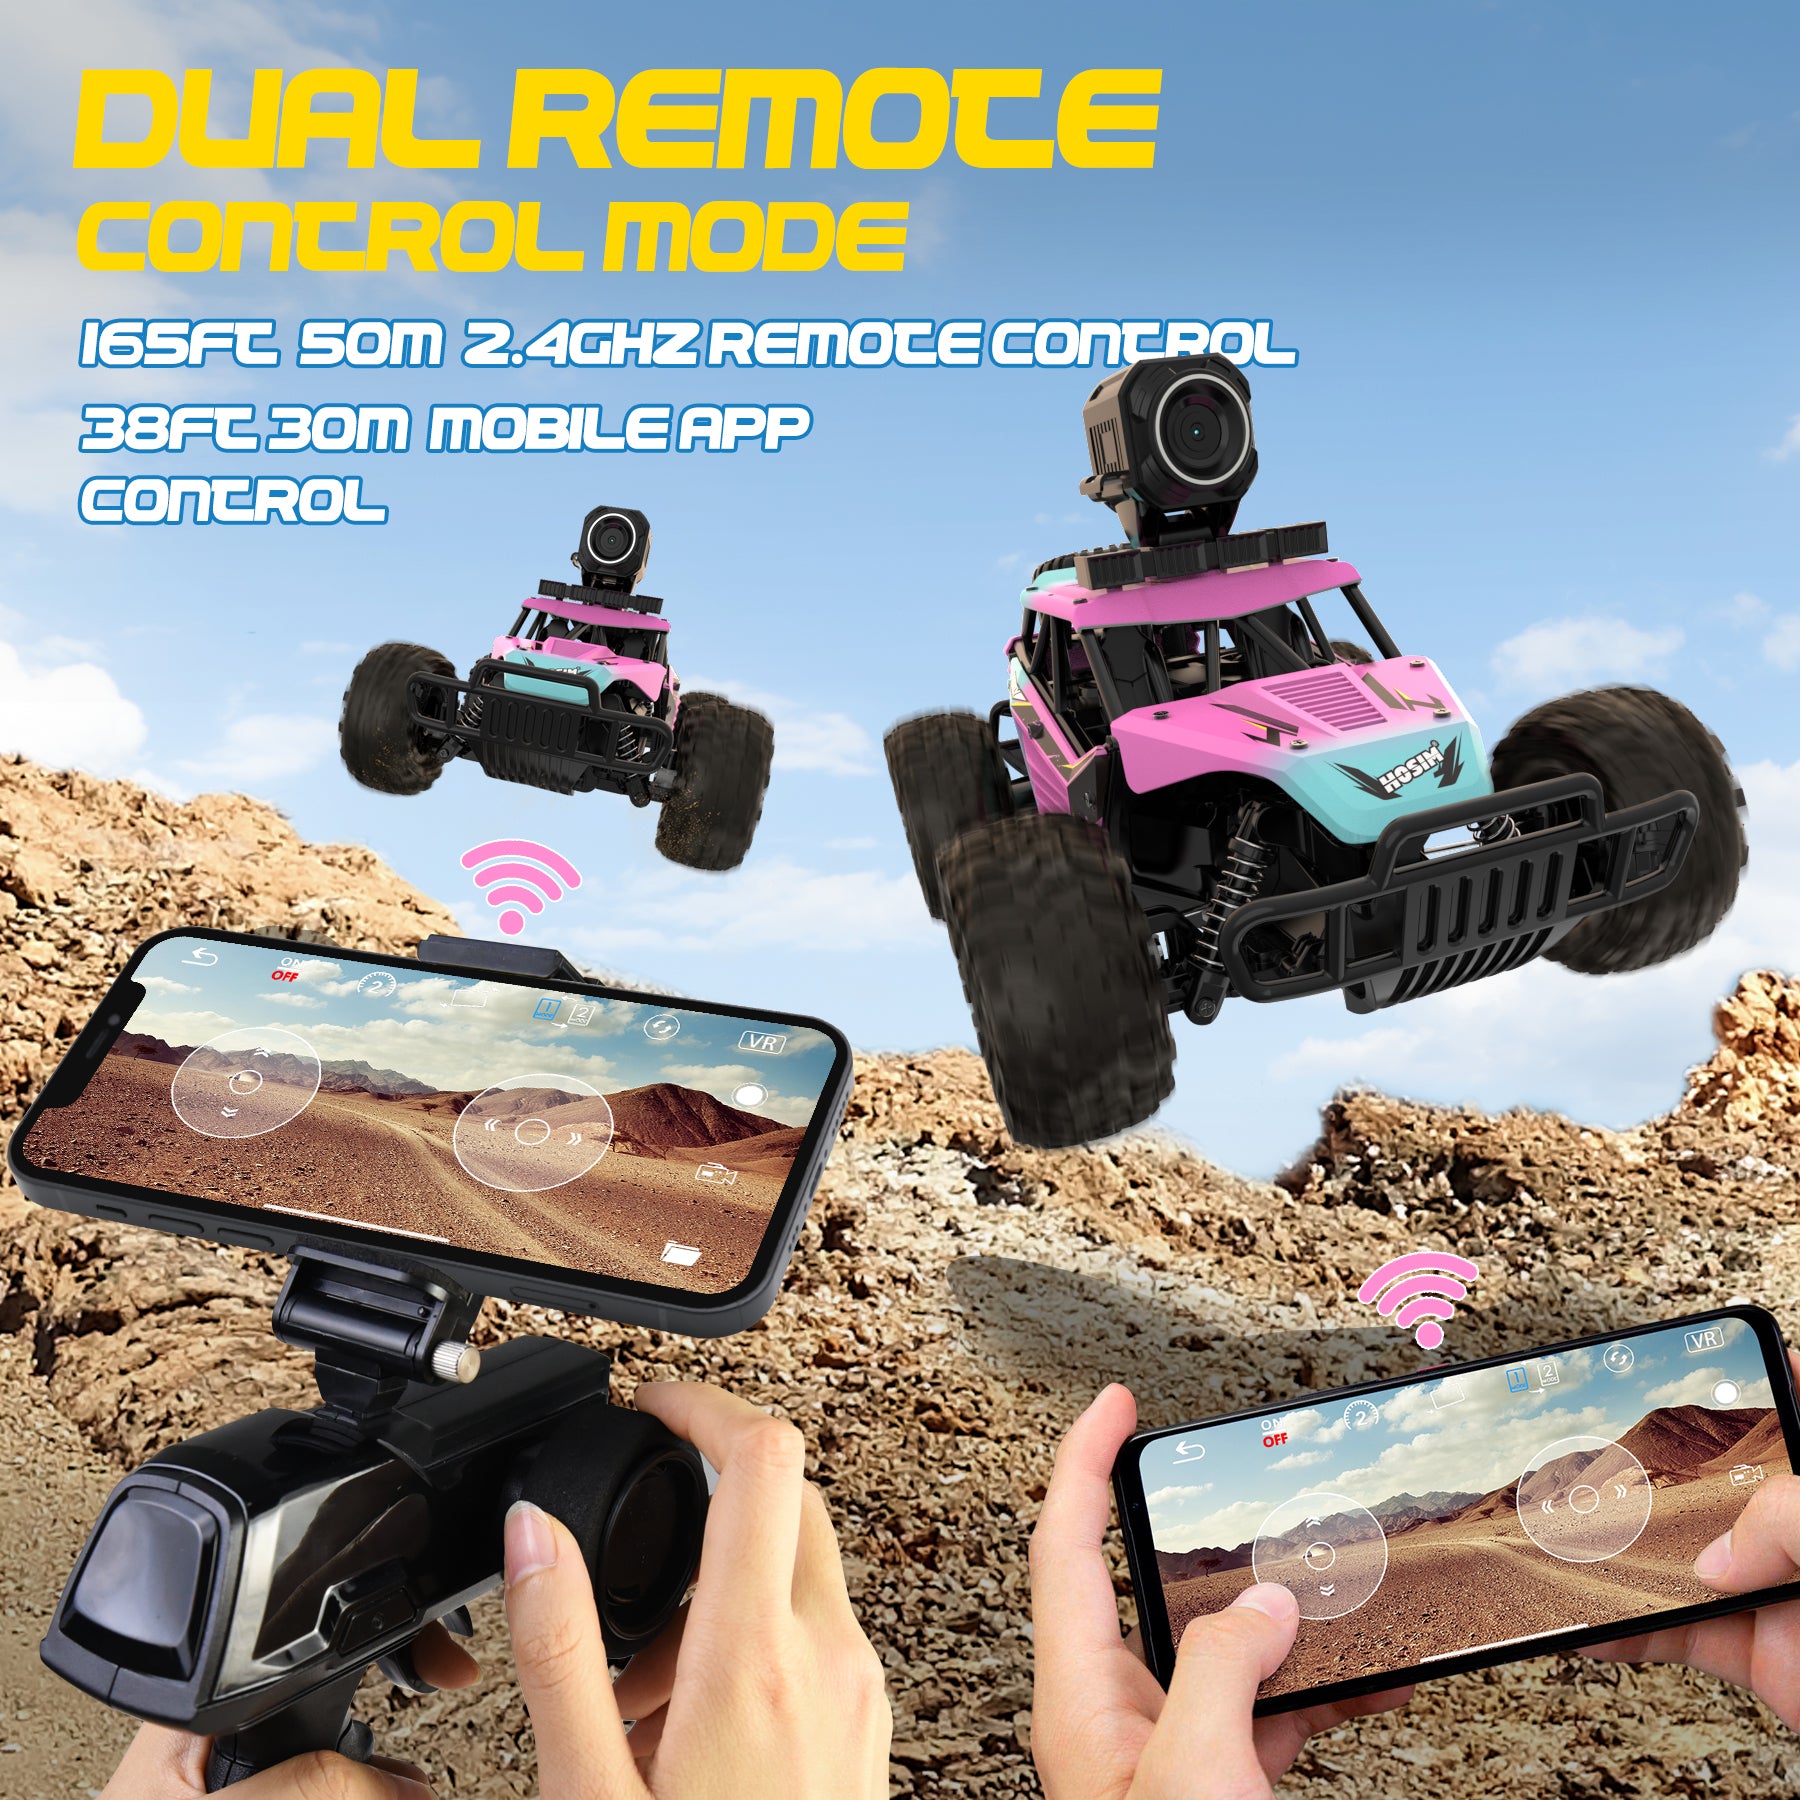 Hosim RC Cars with 1080P HD FPV Camera 1:16 Scale Remote Control Truck Car Off-Road High Speed Monster Trucks Gift Toys